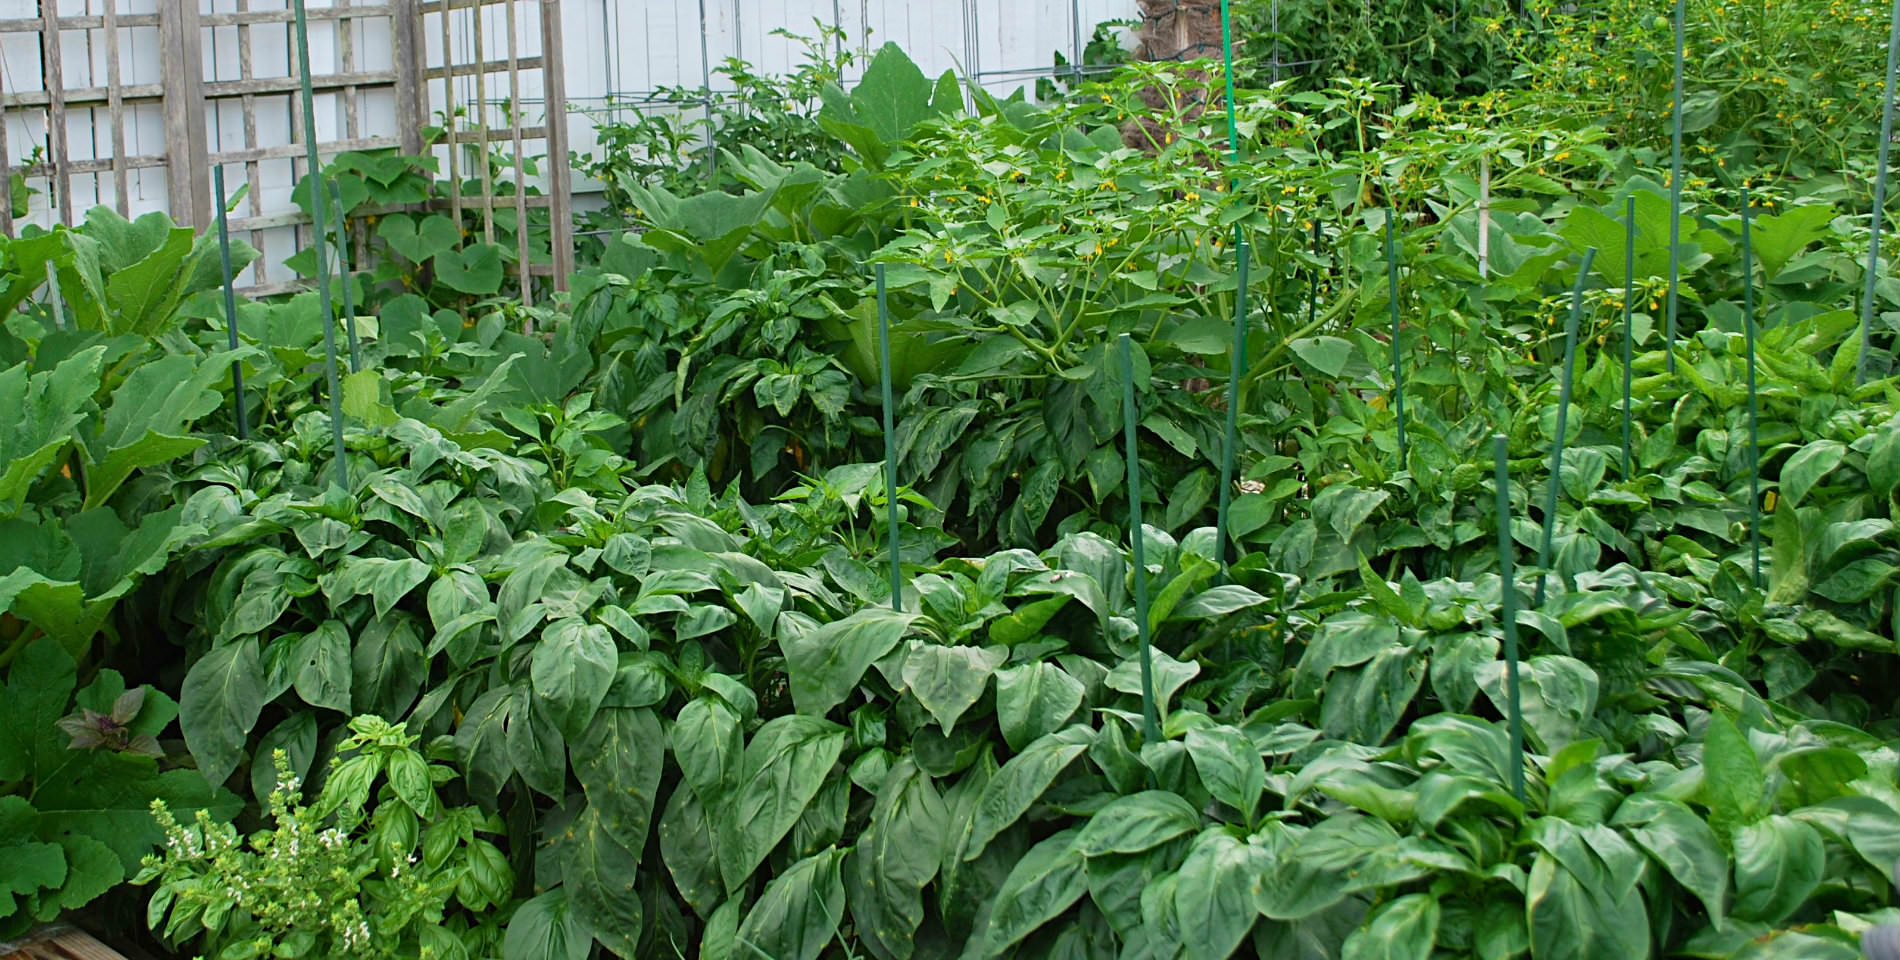 A lush green garden area with different kinds of herbs and vegetables near poles and trellis. 